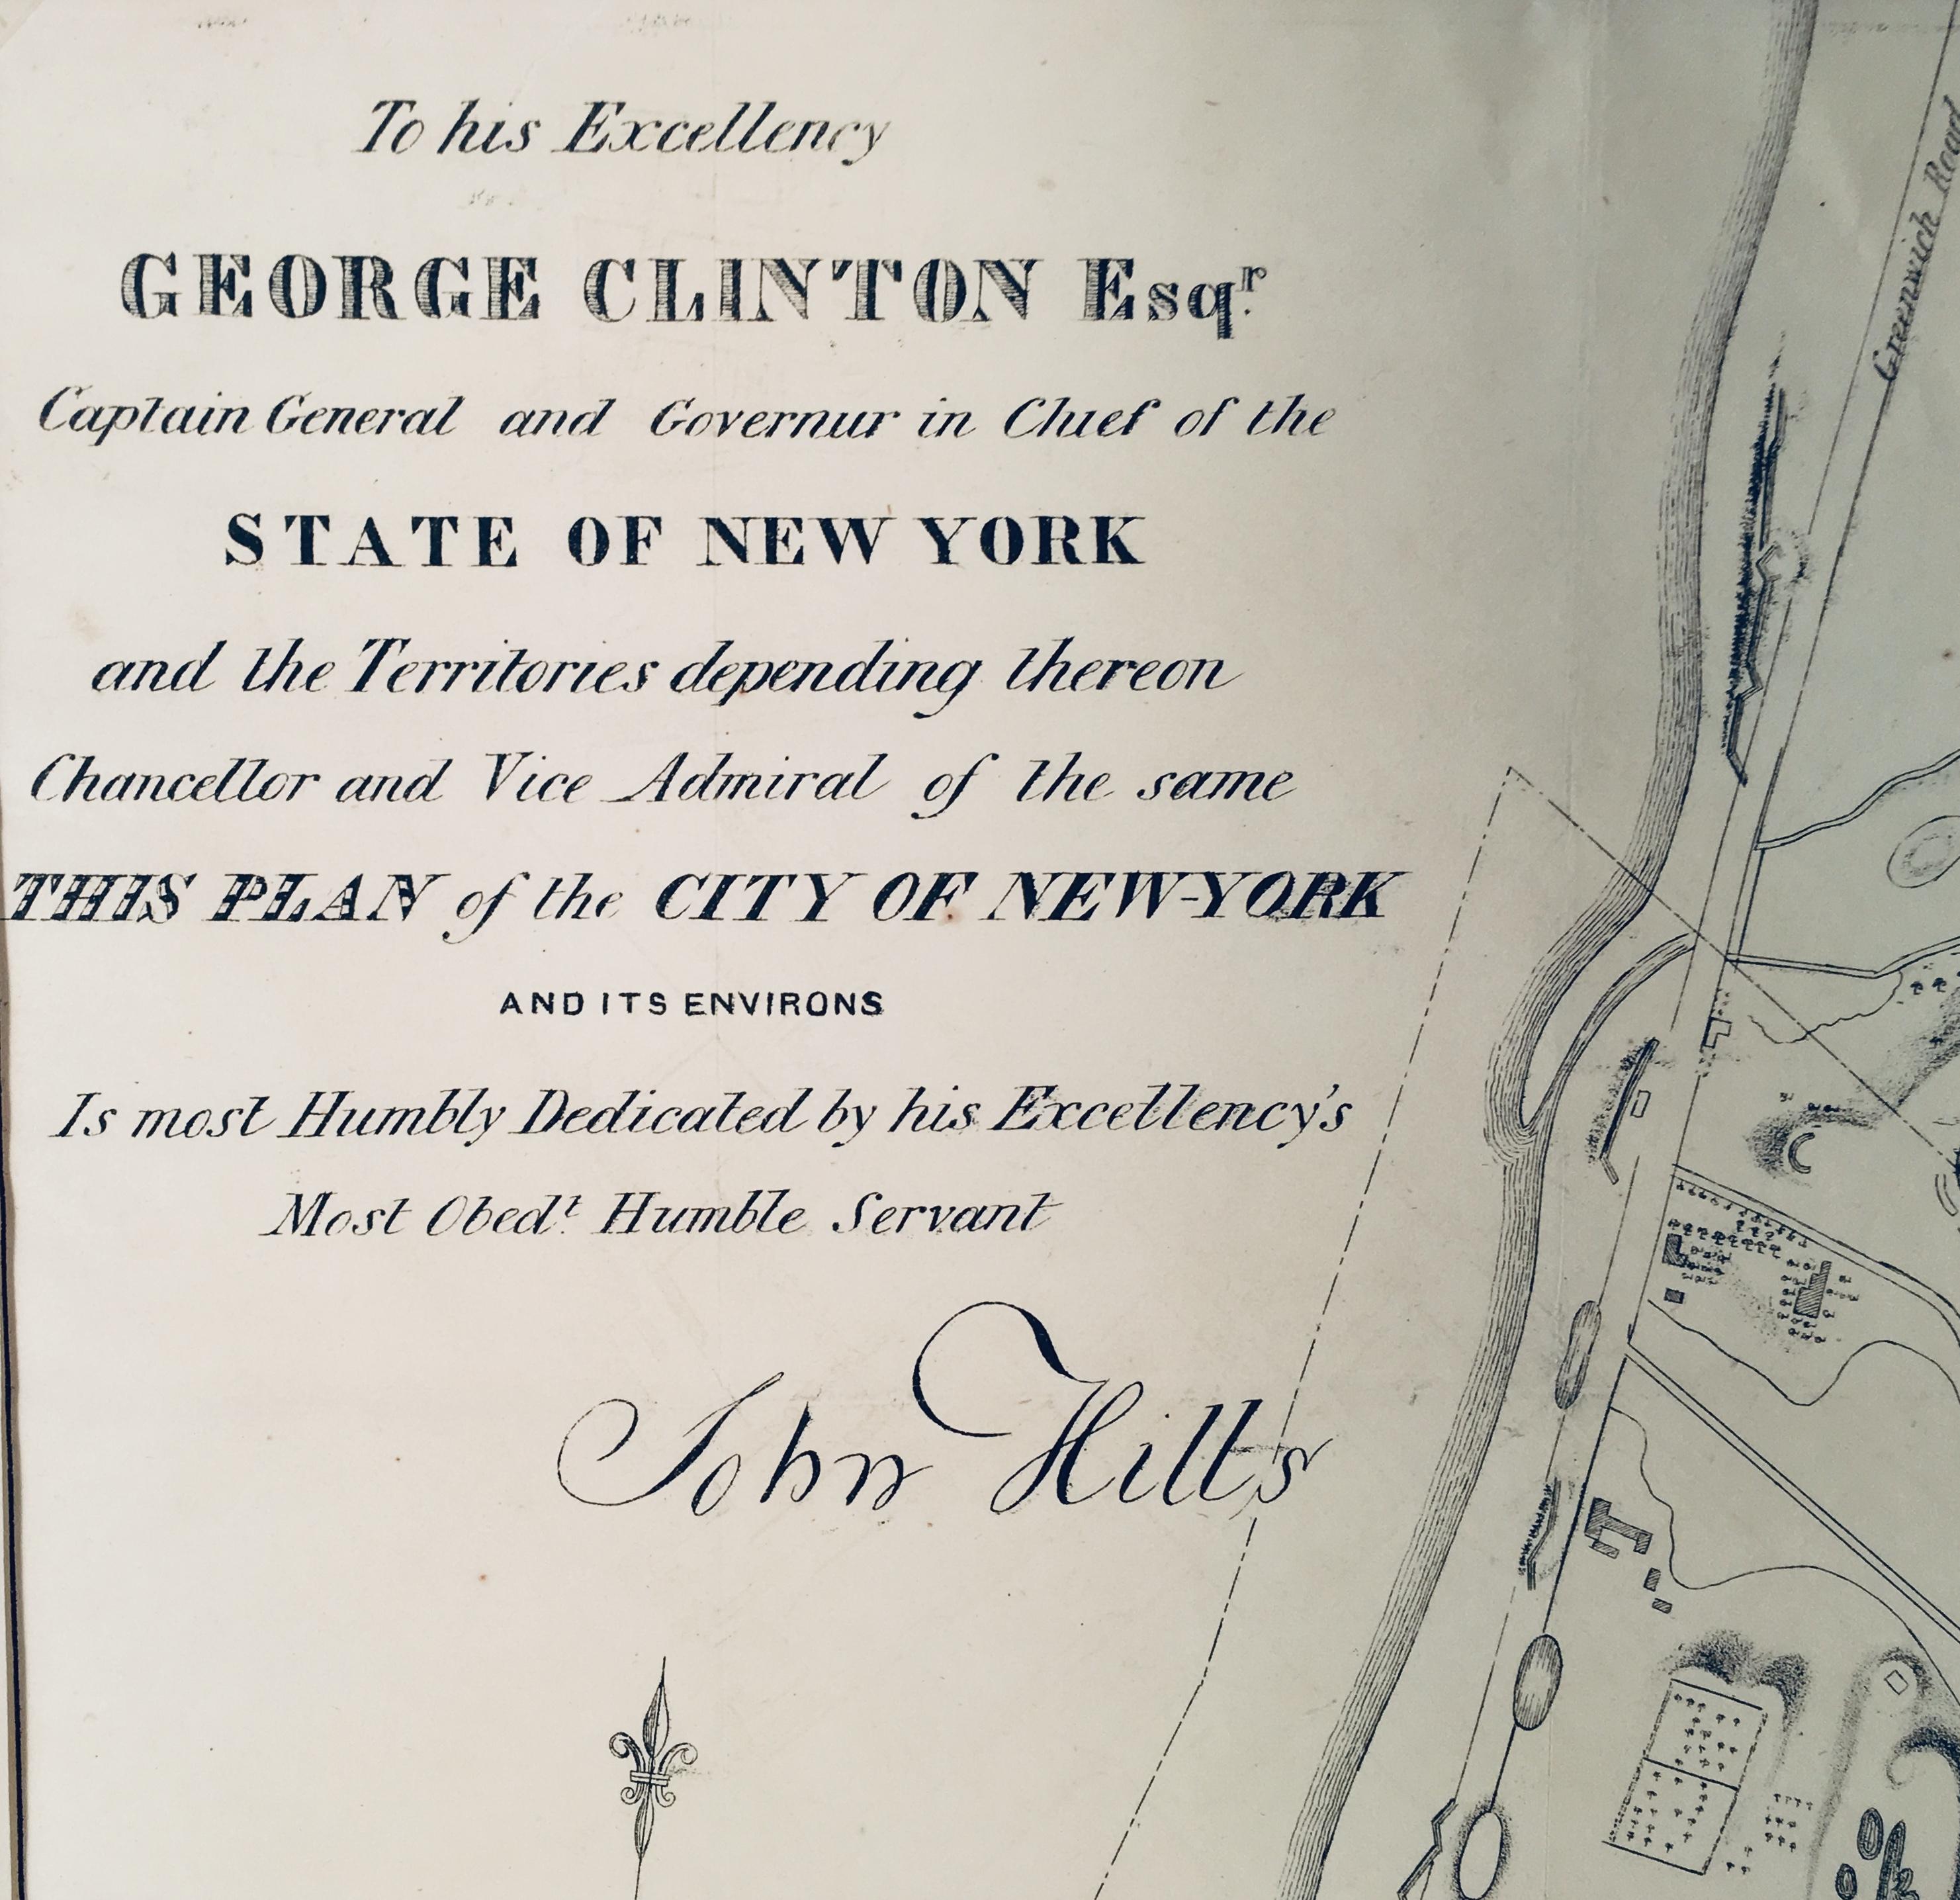 Plan of the City of New York - Print by George Hayward